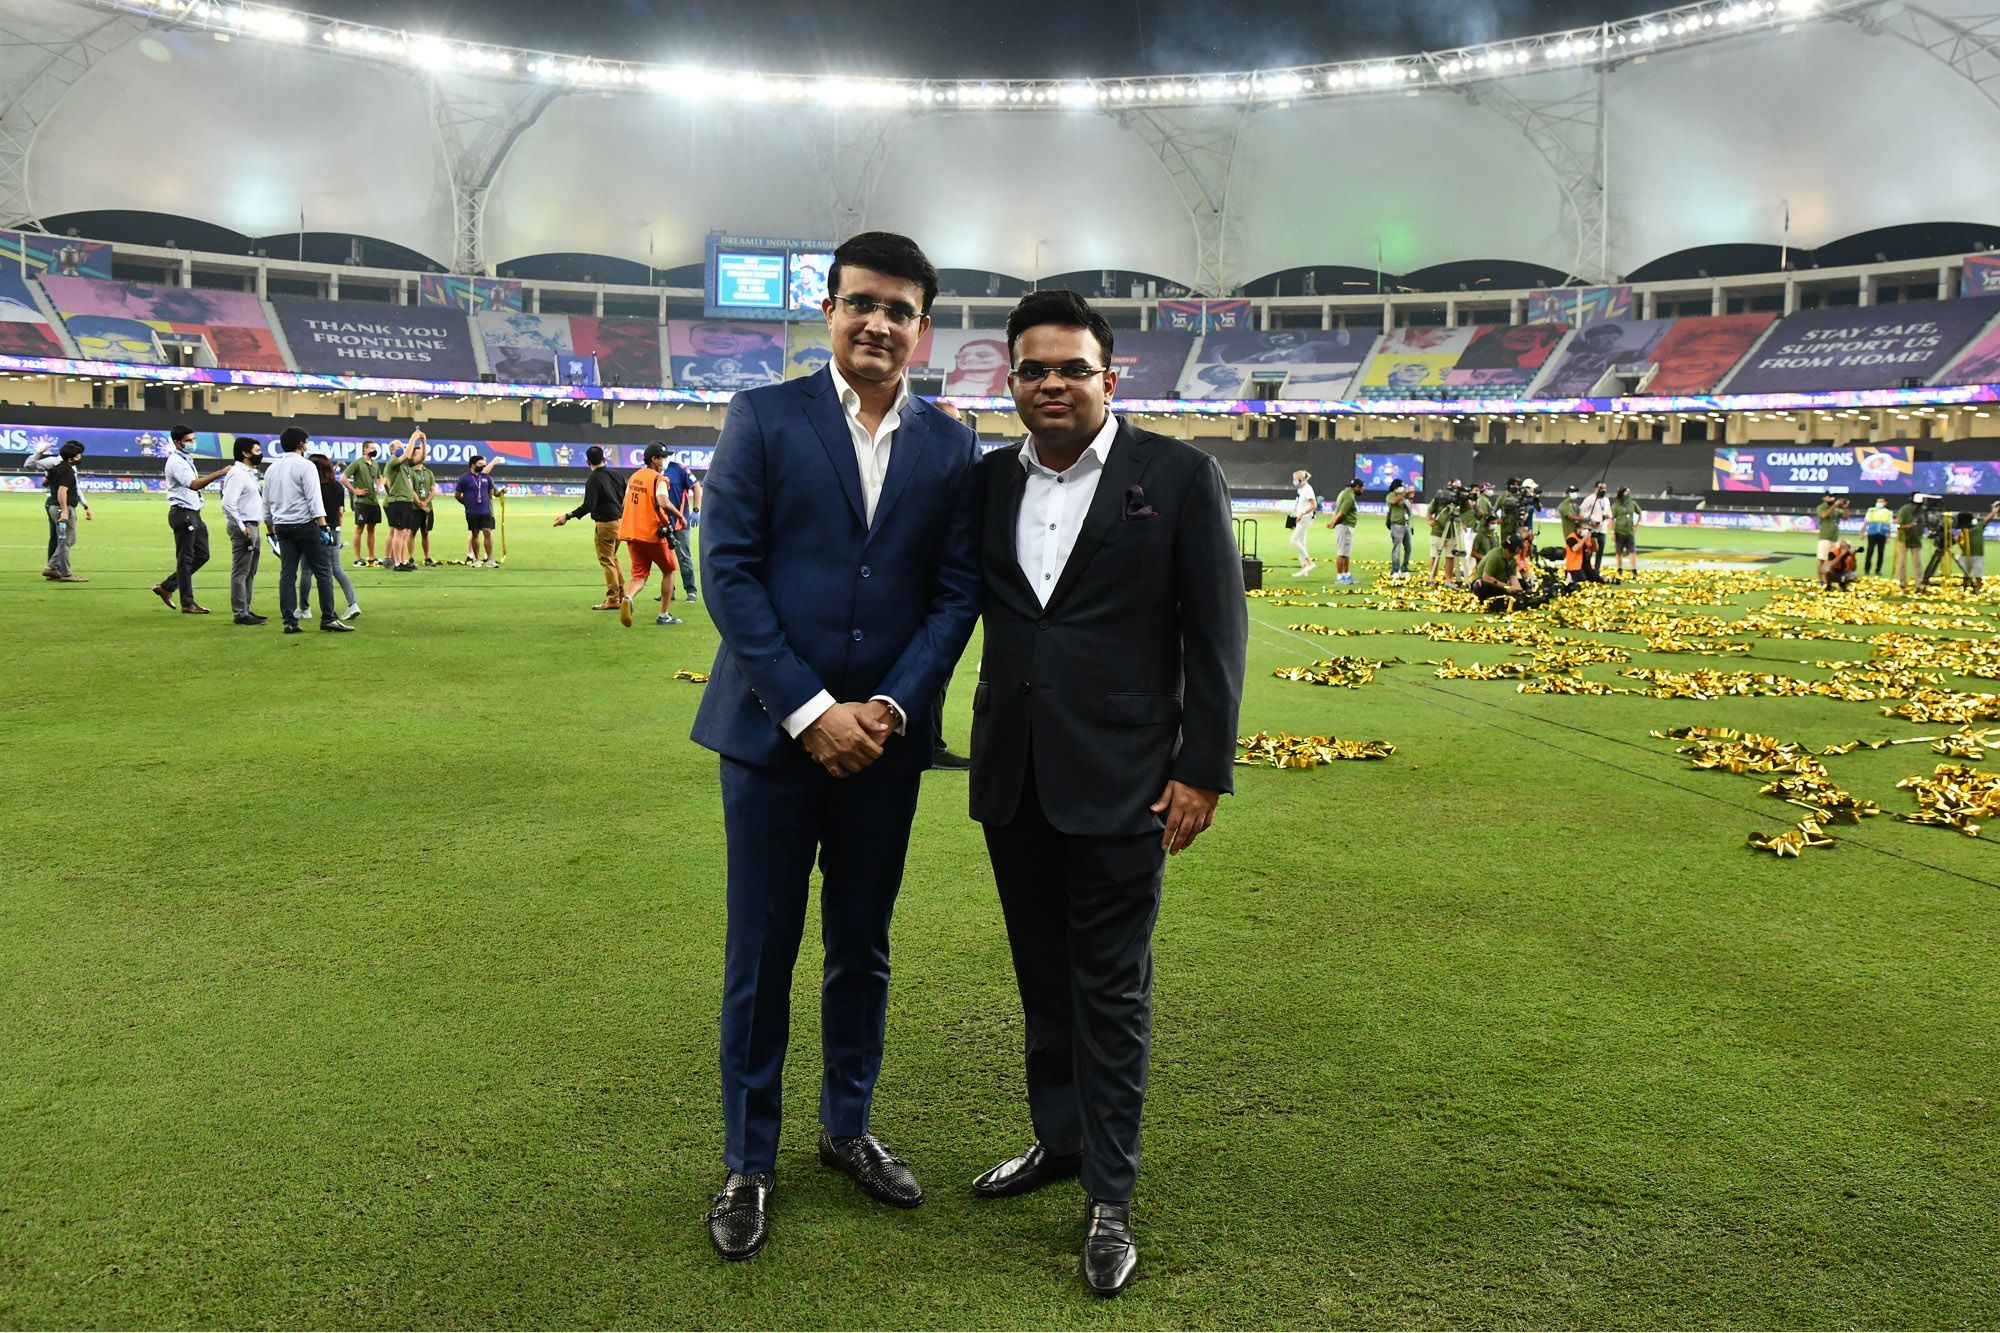 Matter of great honour for BCCI to host 2021 T20 World Cup in India, expresses Sourav Ganguly